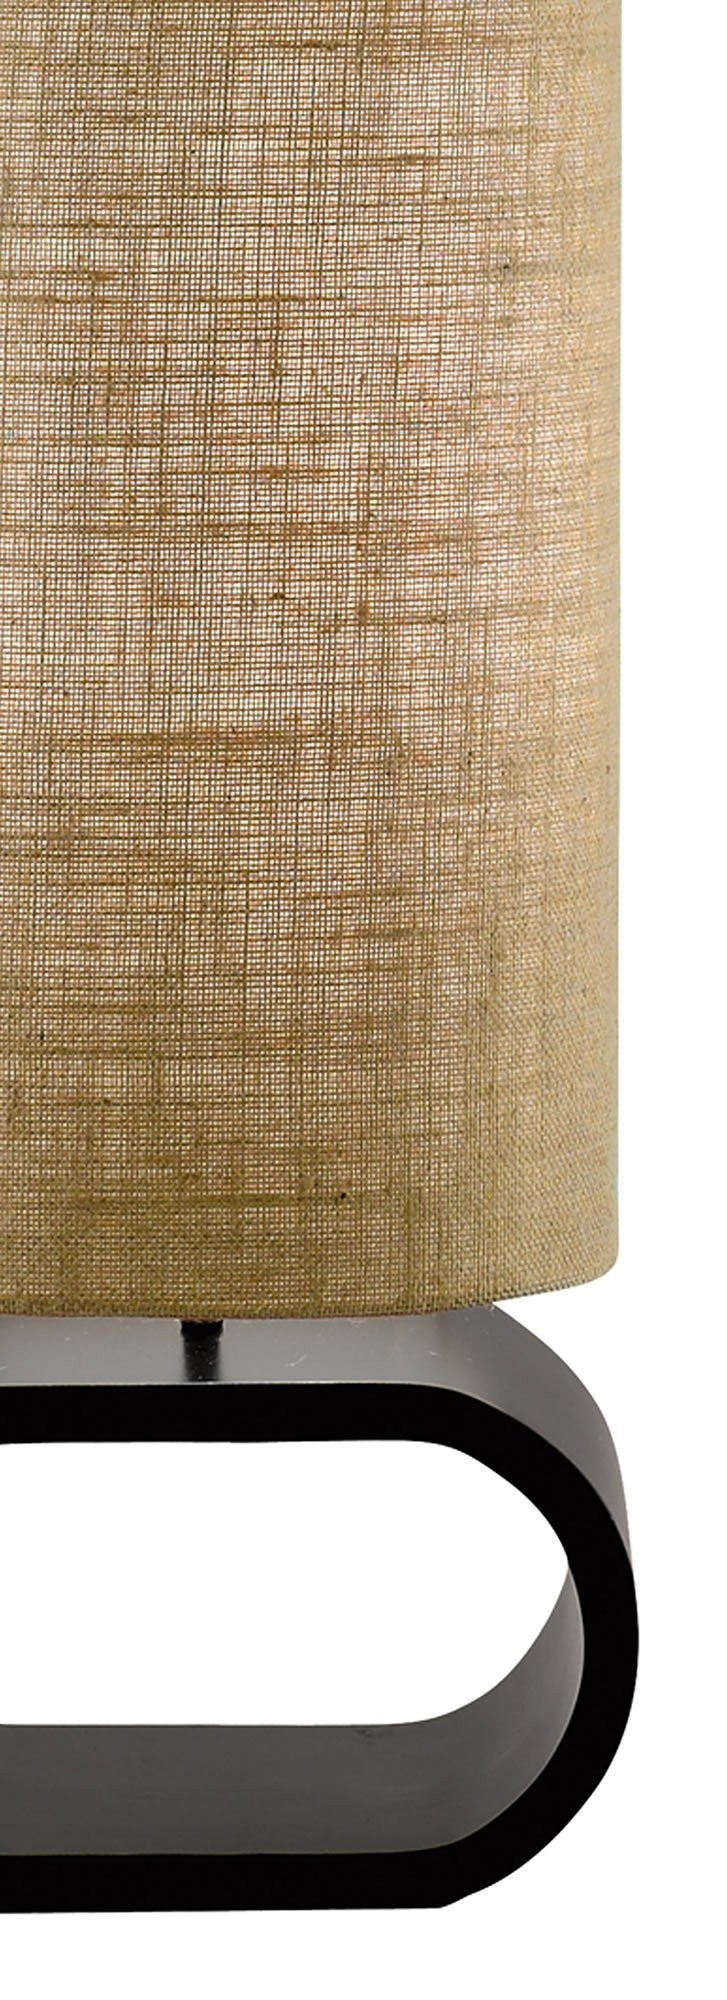 Harmony Floor Lamp Adesso throughout sizing 727 X 2000